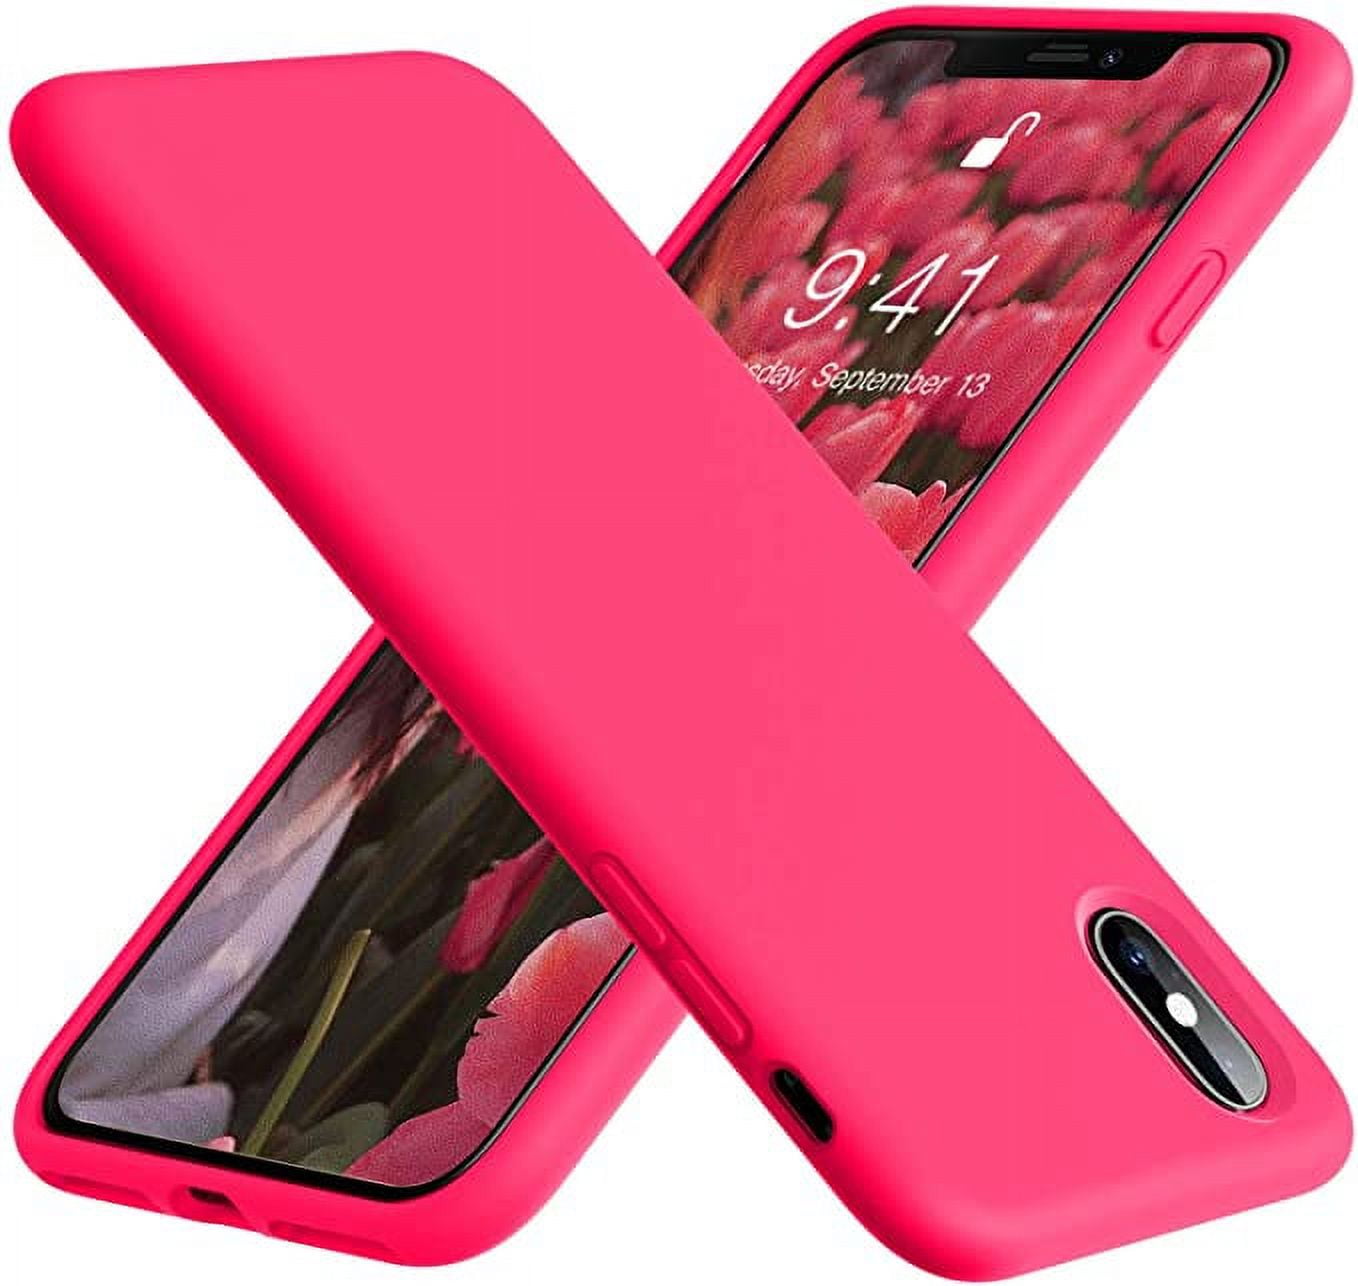 M Cart Silicon Microfiber Back Case Cover for iPhone Xs case Cover